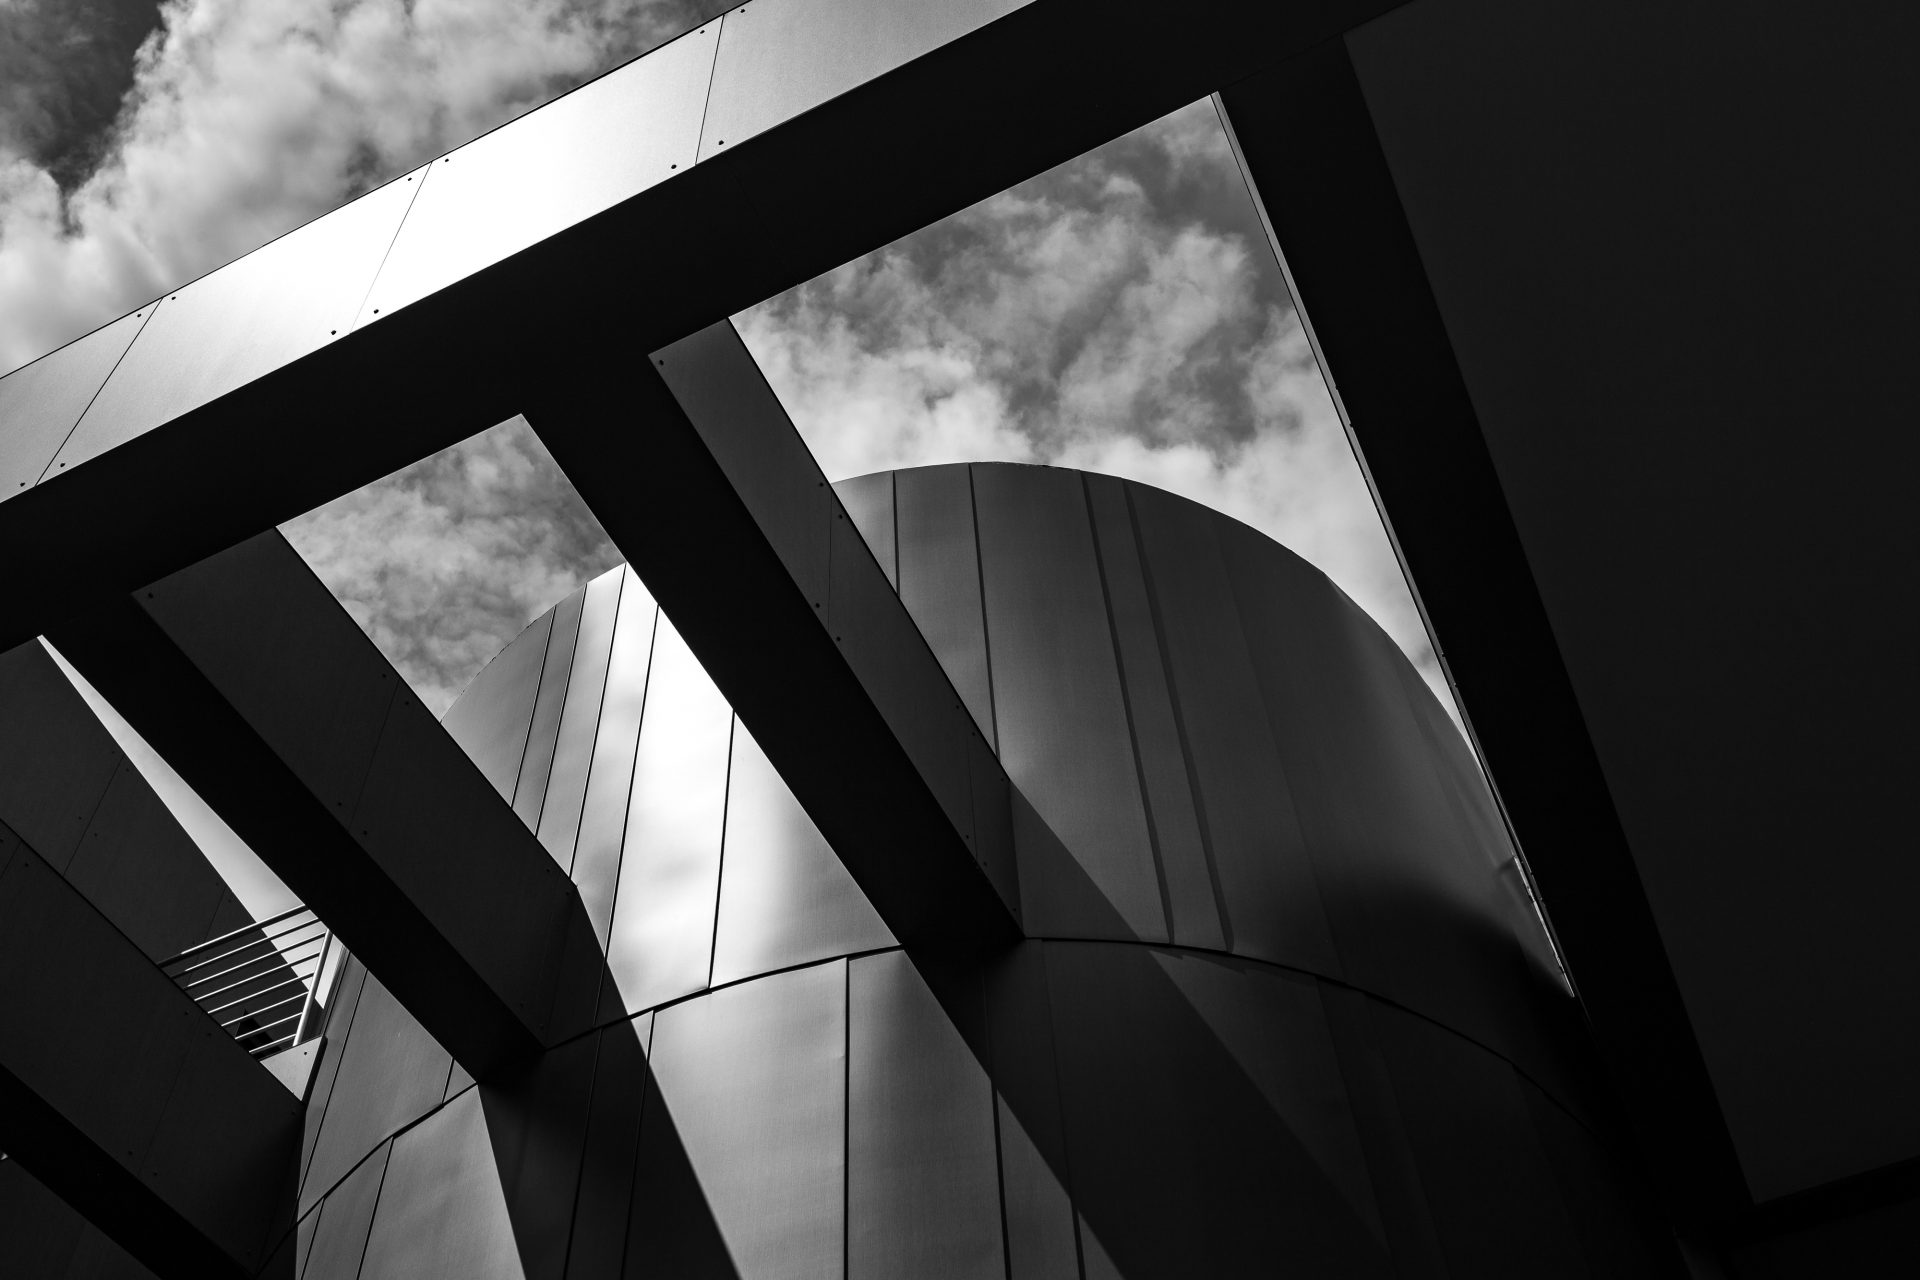 black and white, modern, abstract, design, architecture, contrast, shadows, angle, angles, curves, metal